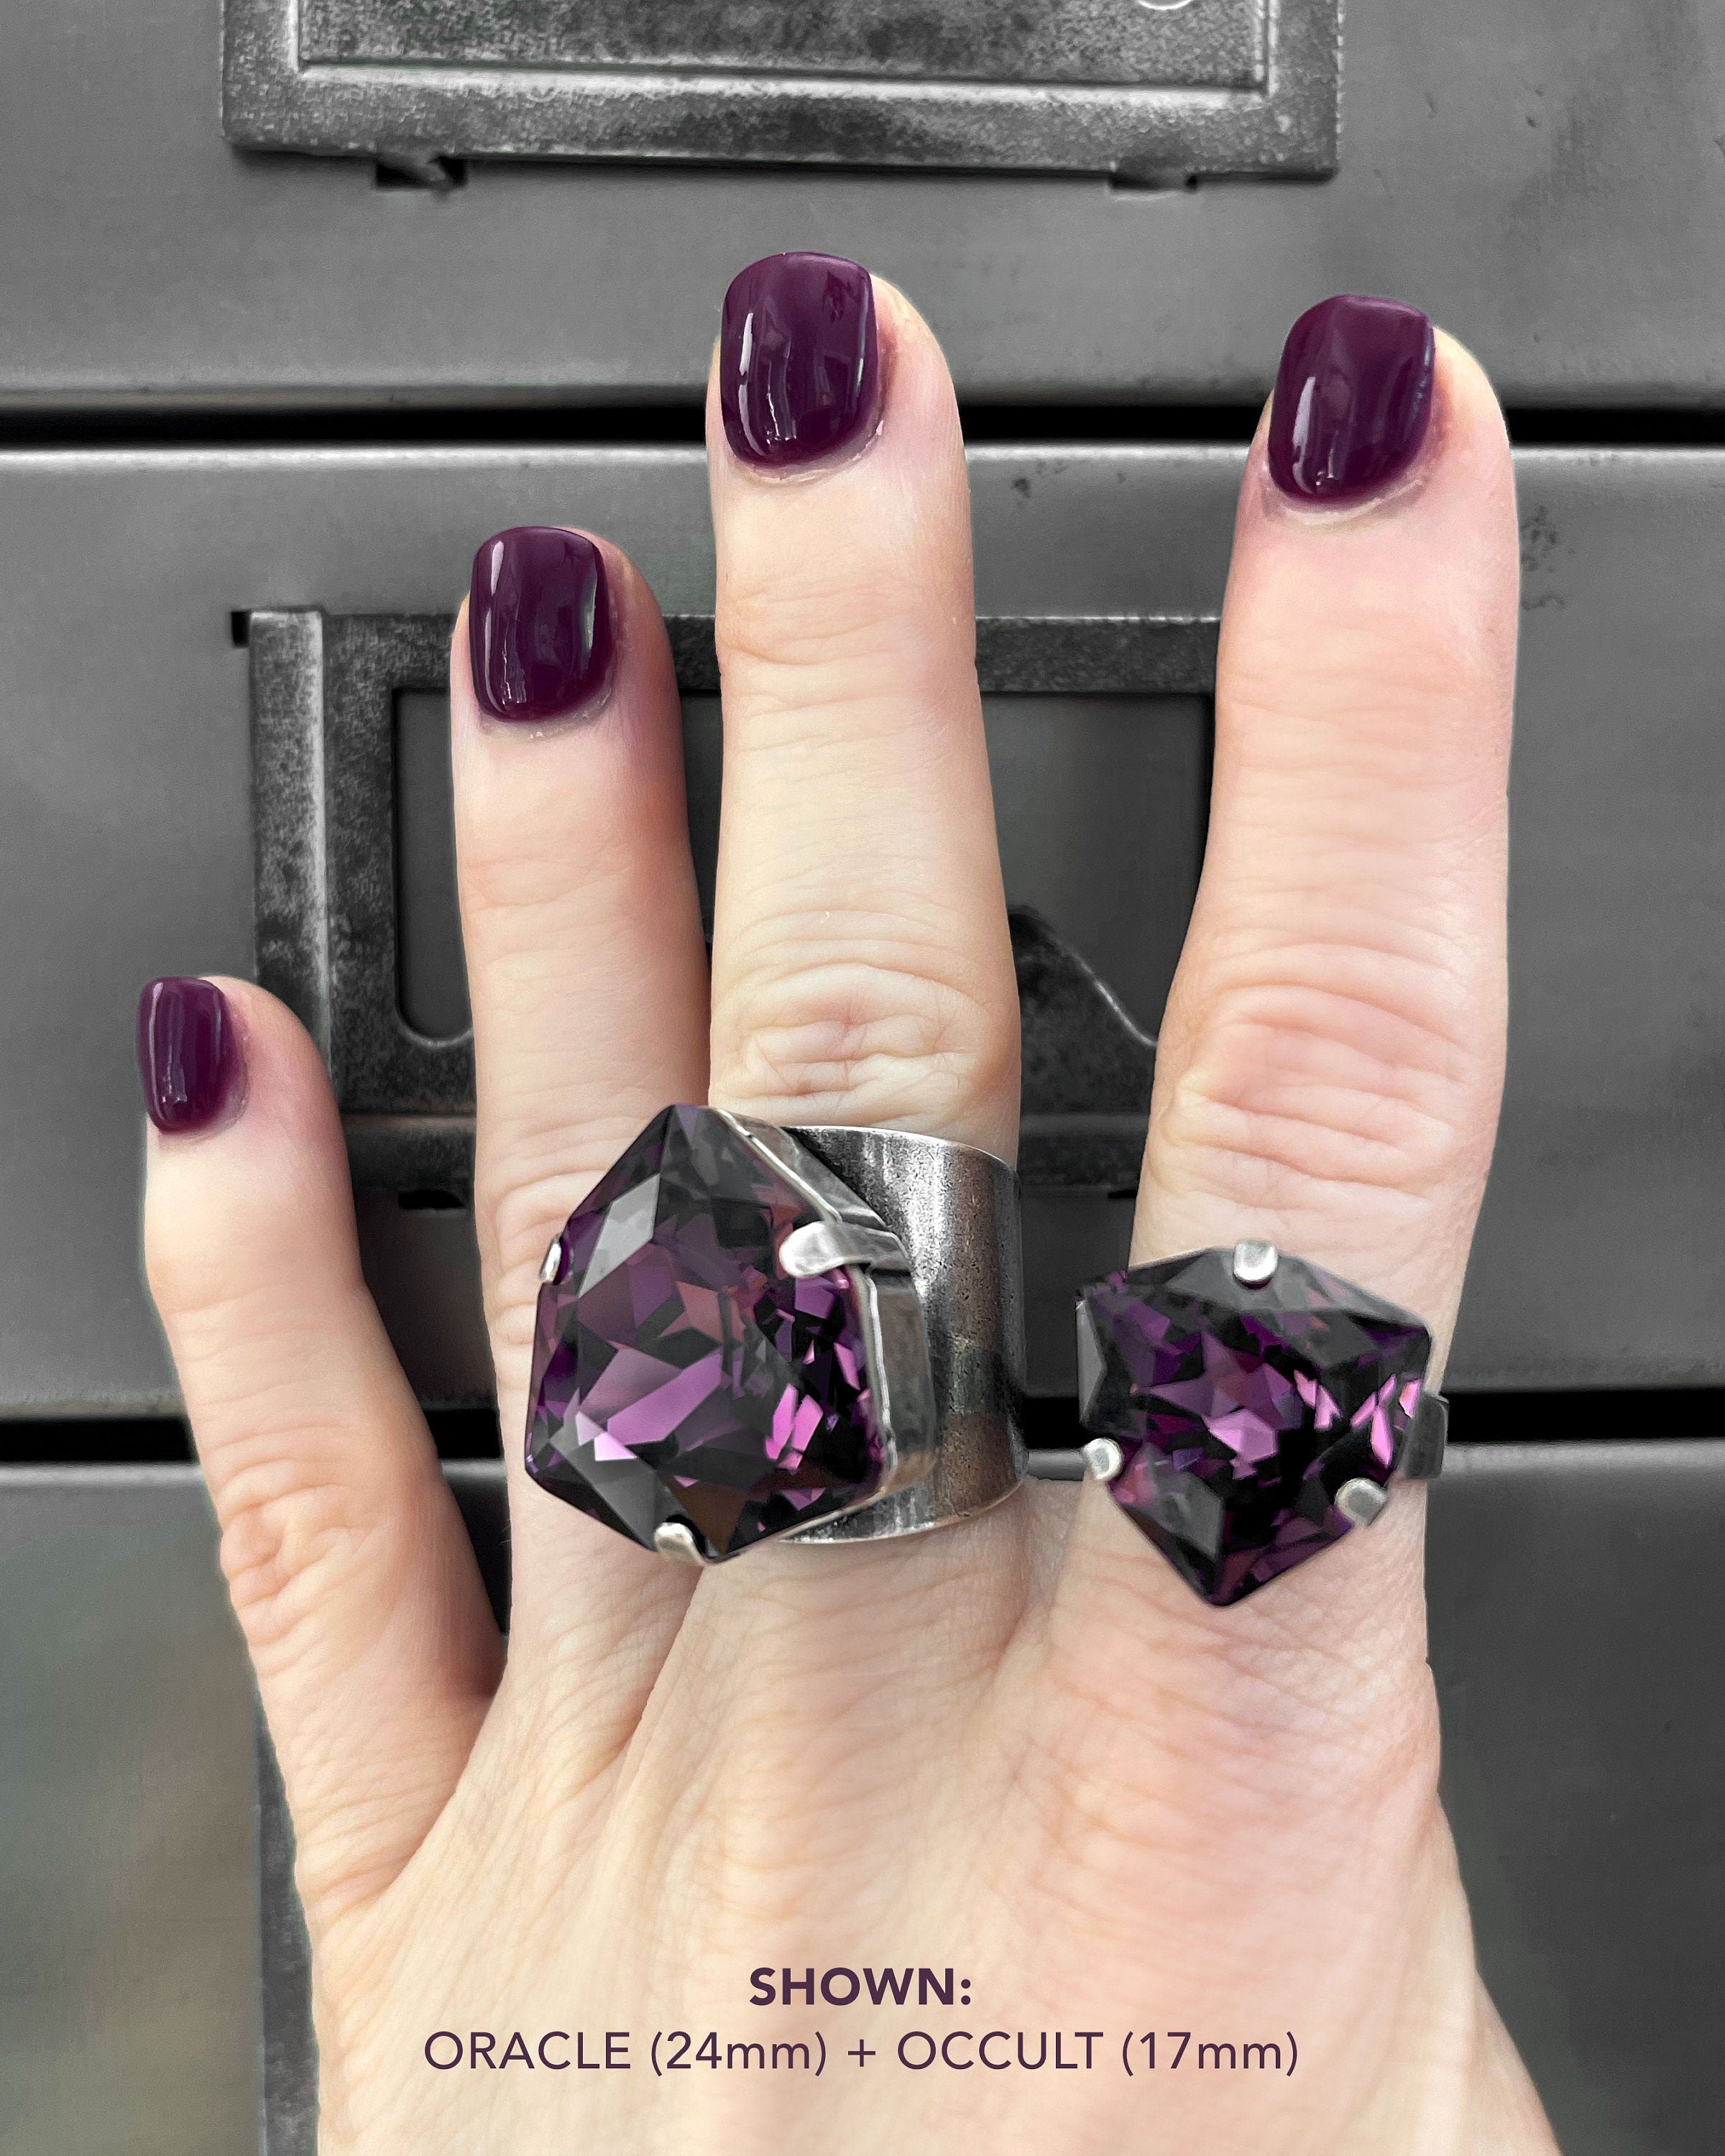 OCCULT - Triangle Purple Crystal Ring, Stunning Rare Trilliant 'Amethyst' Crystal - Adjustable Ring - Wicked Witch Purple Halloween Ring